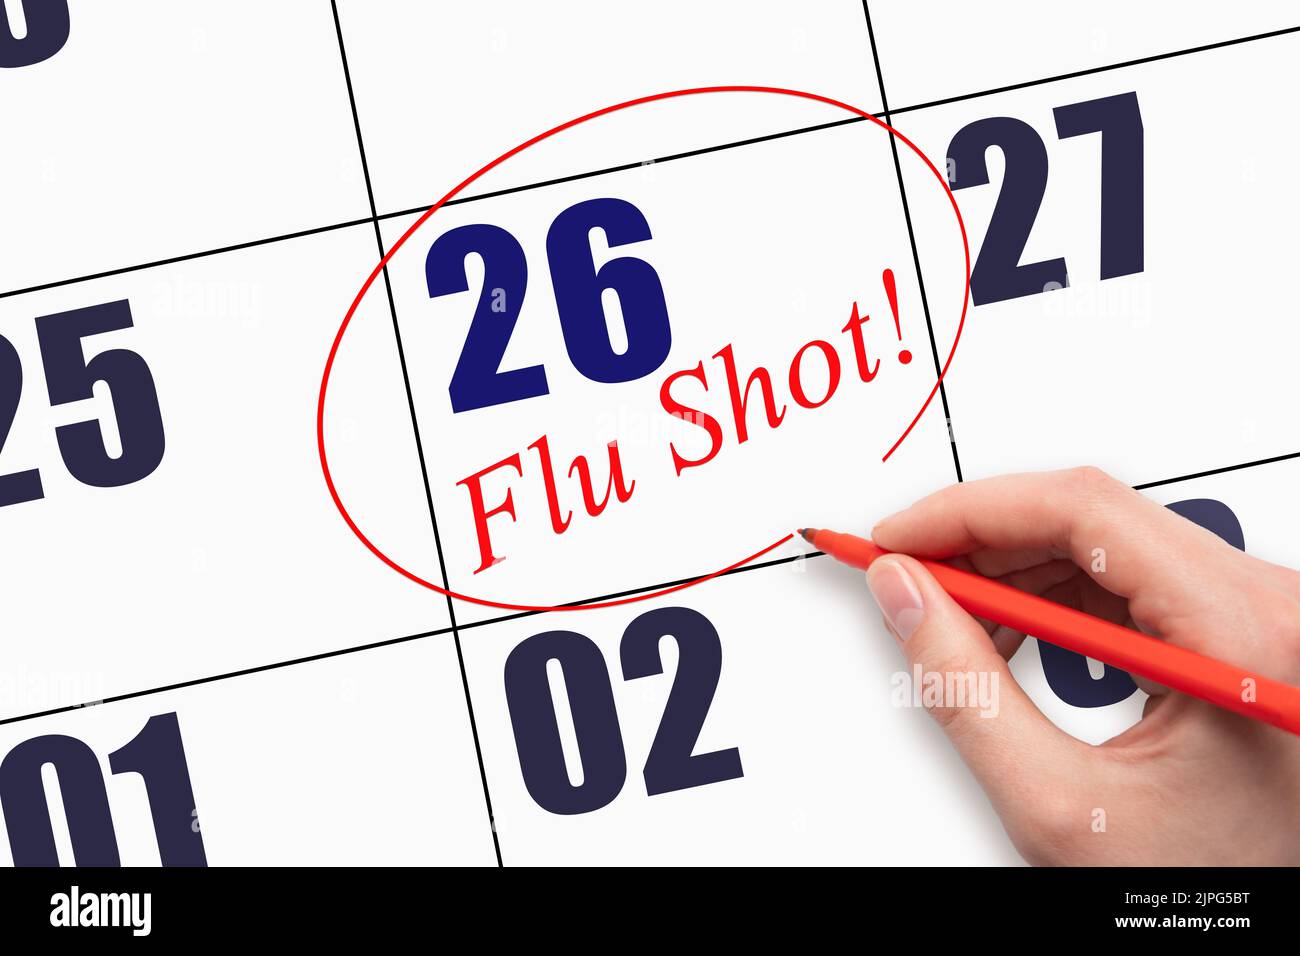 26th day of the month.  Hand writing text FLU SHOT and circling the calendar date. Mark the date on the day planner to have a flu shot. Healthcare Med Stock Photo